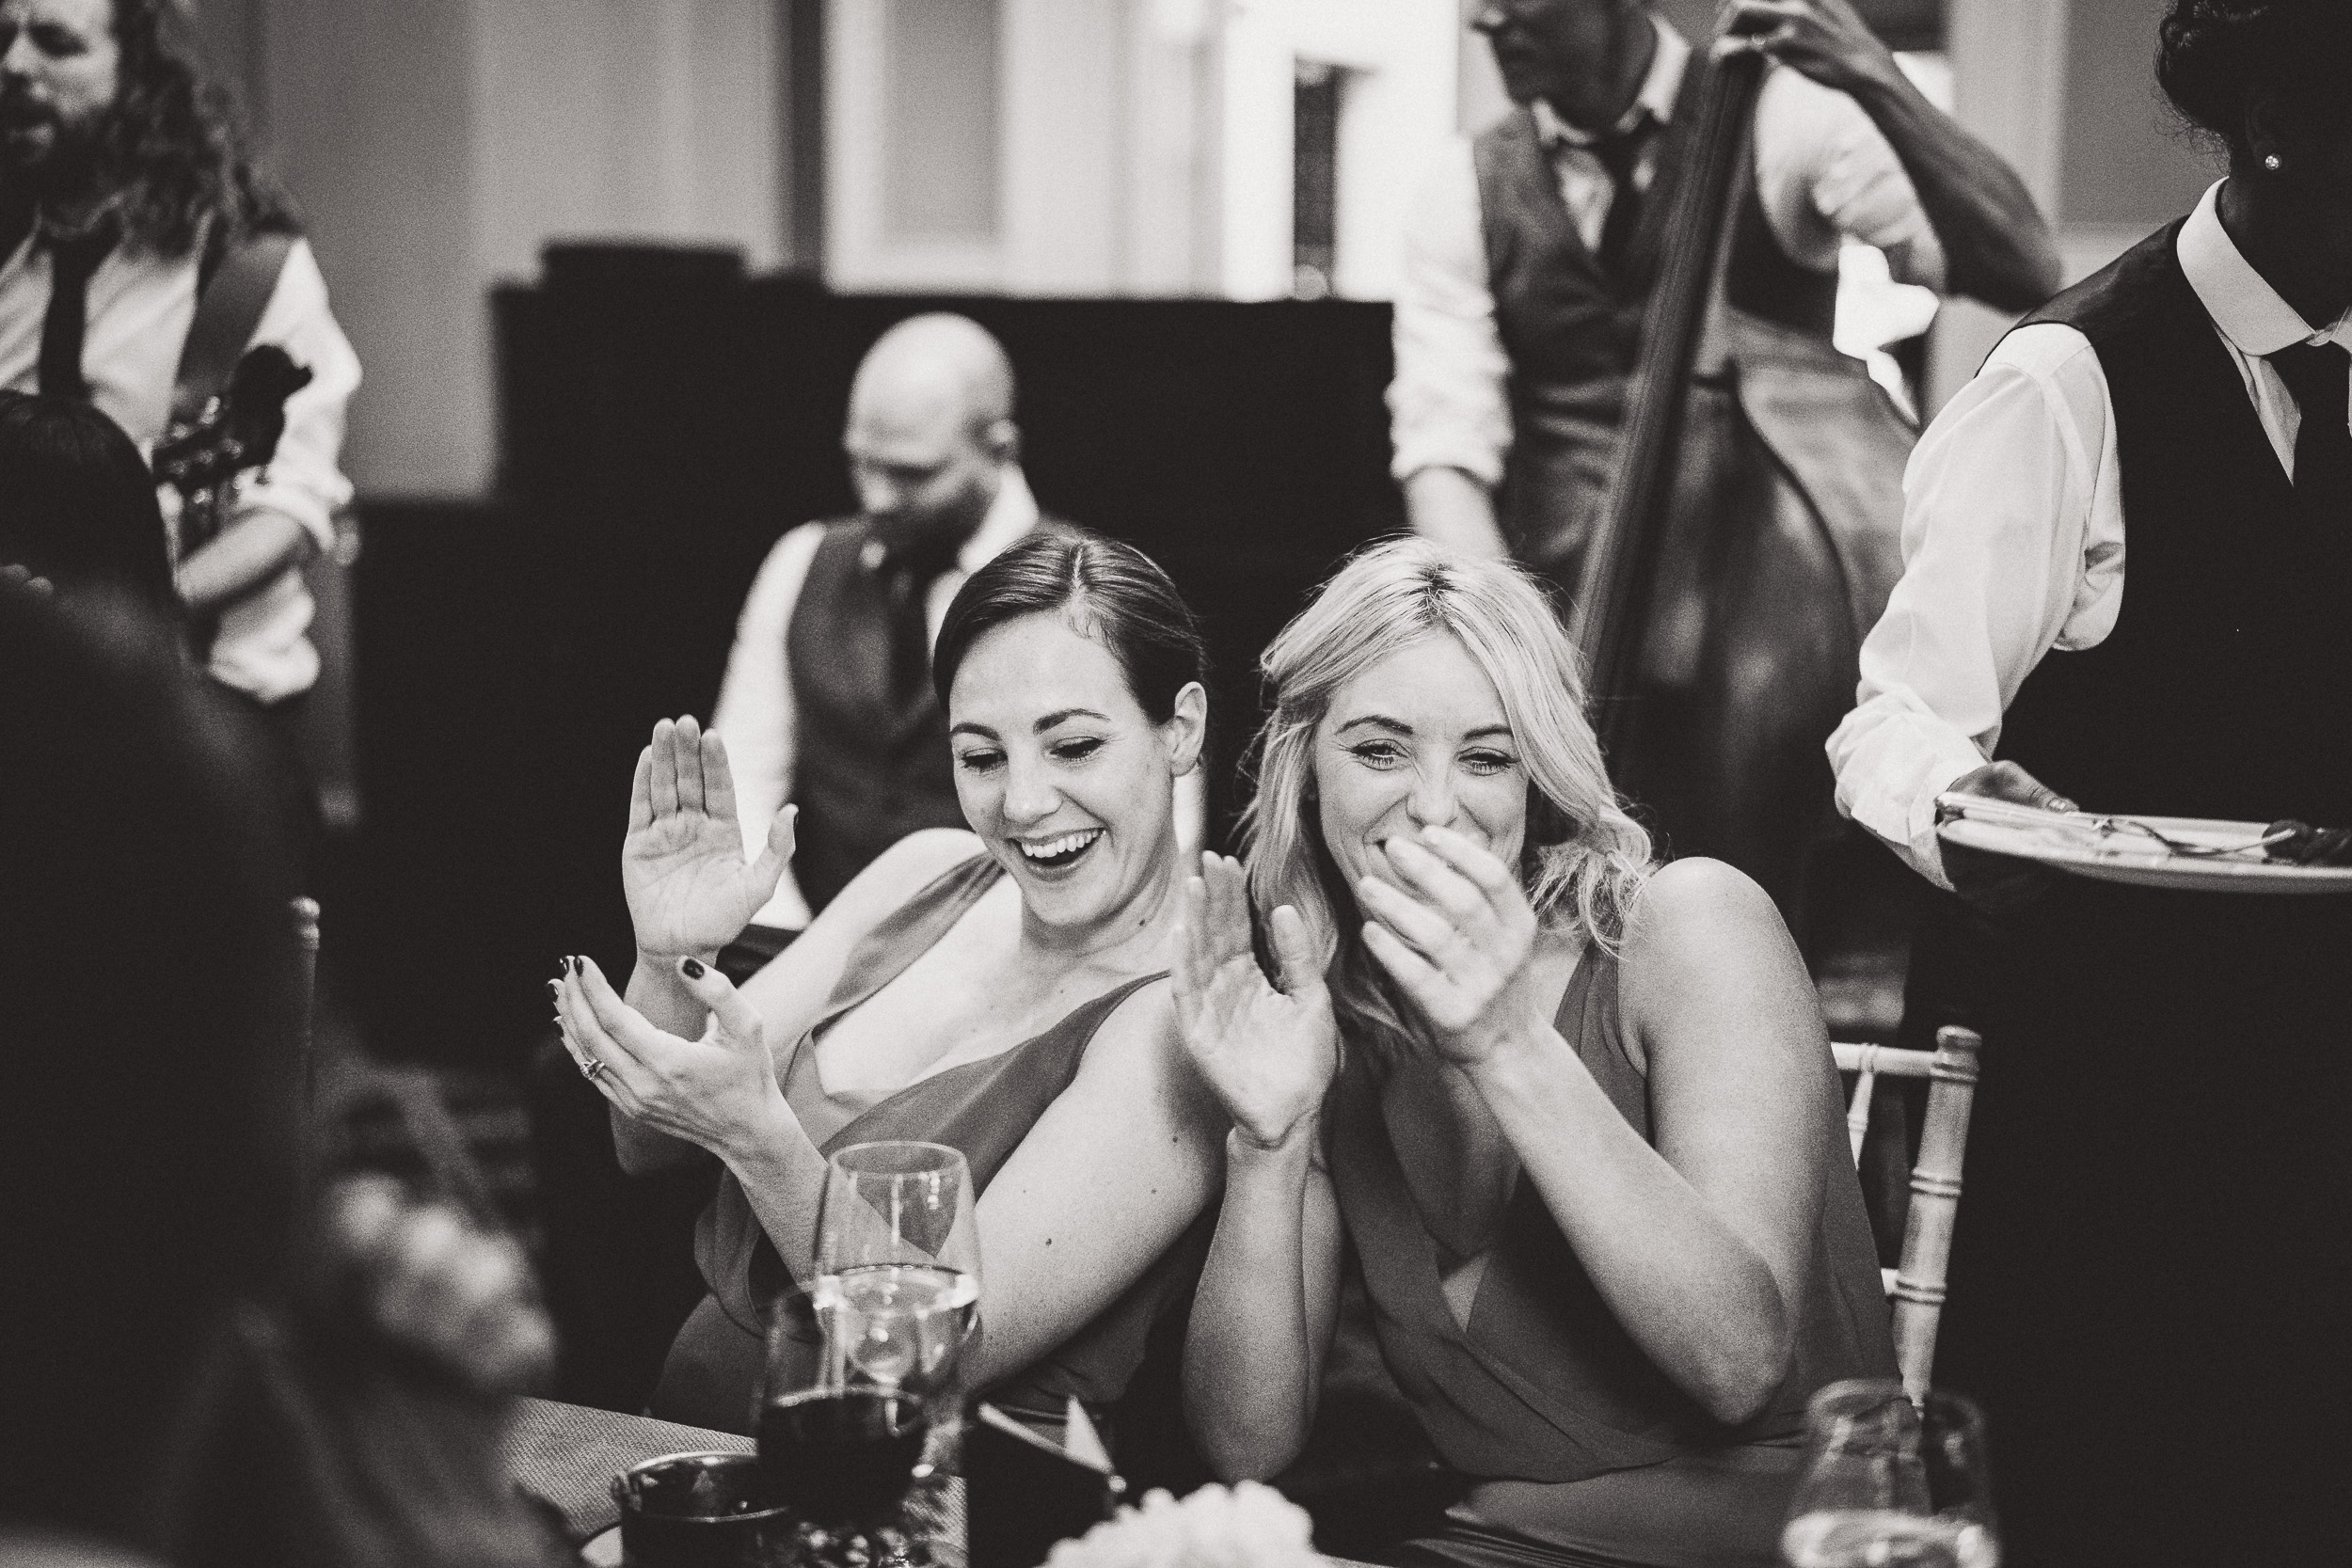 Bridesmaids clapping captured in a wedding photo by the wedding photographer.